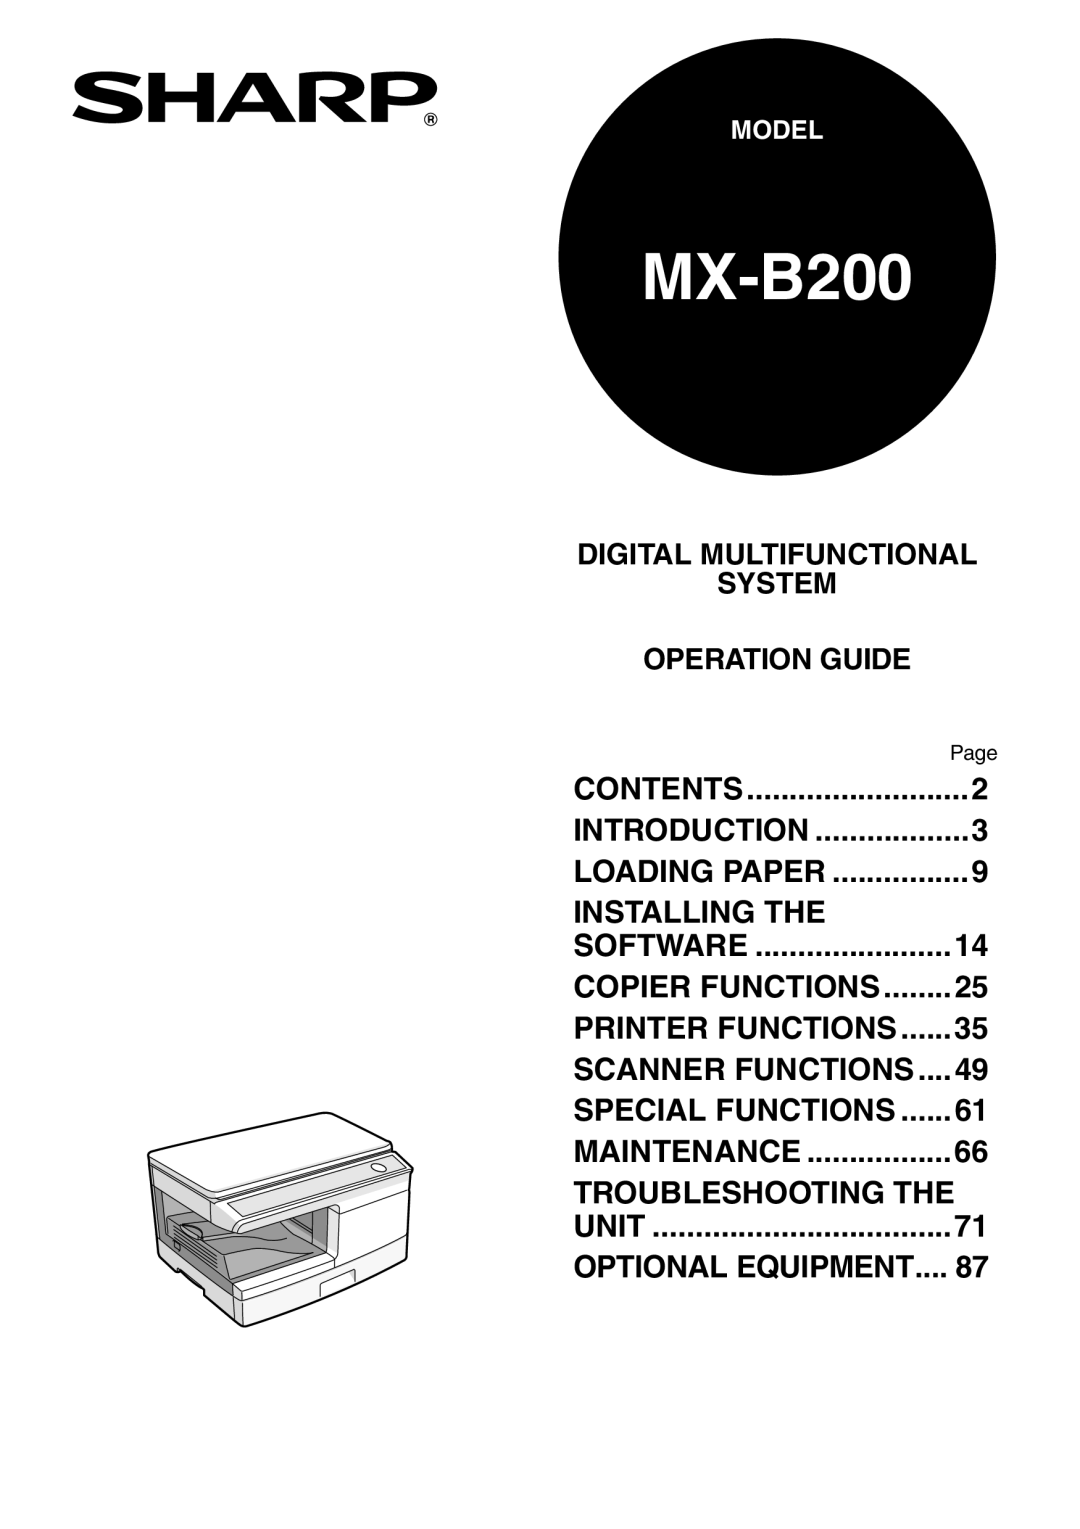 Sharp MX-B200 manual Installing The, Software, Maintenance, Troubleshooting The, Unit, Contents, Introduction 